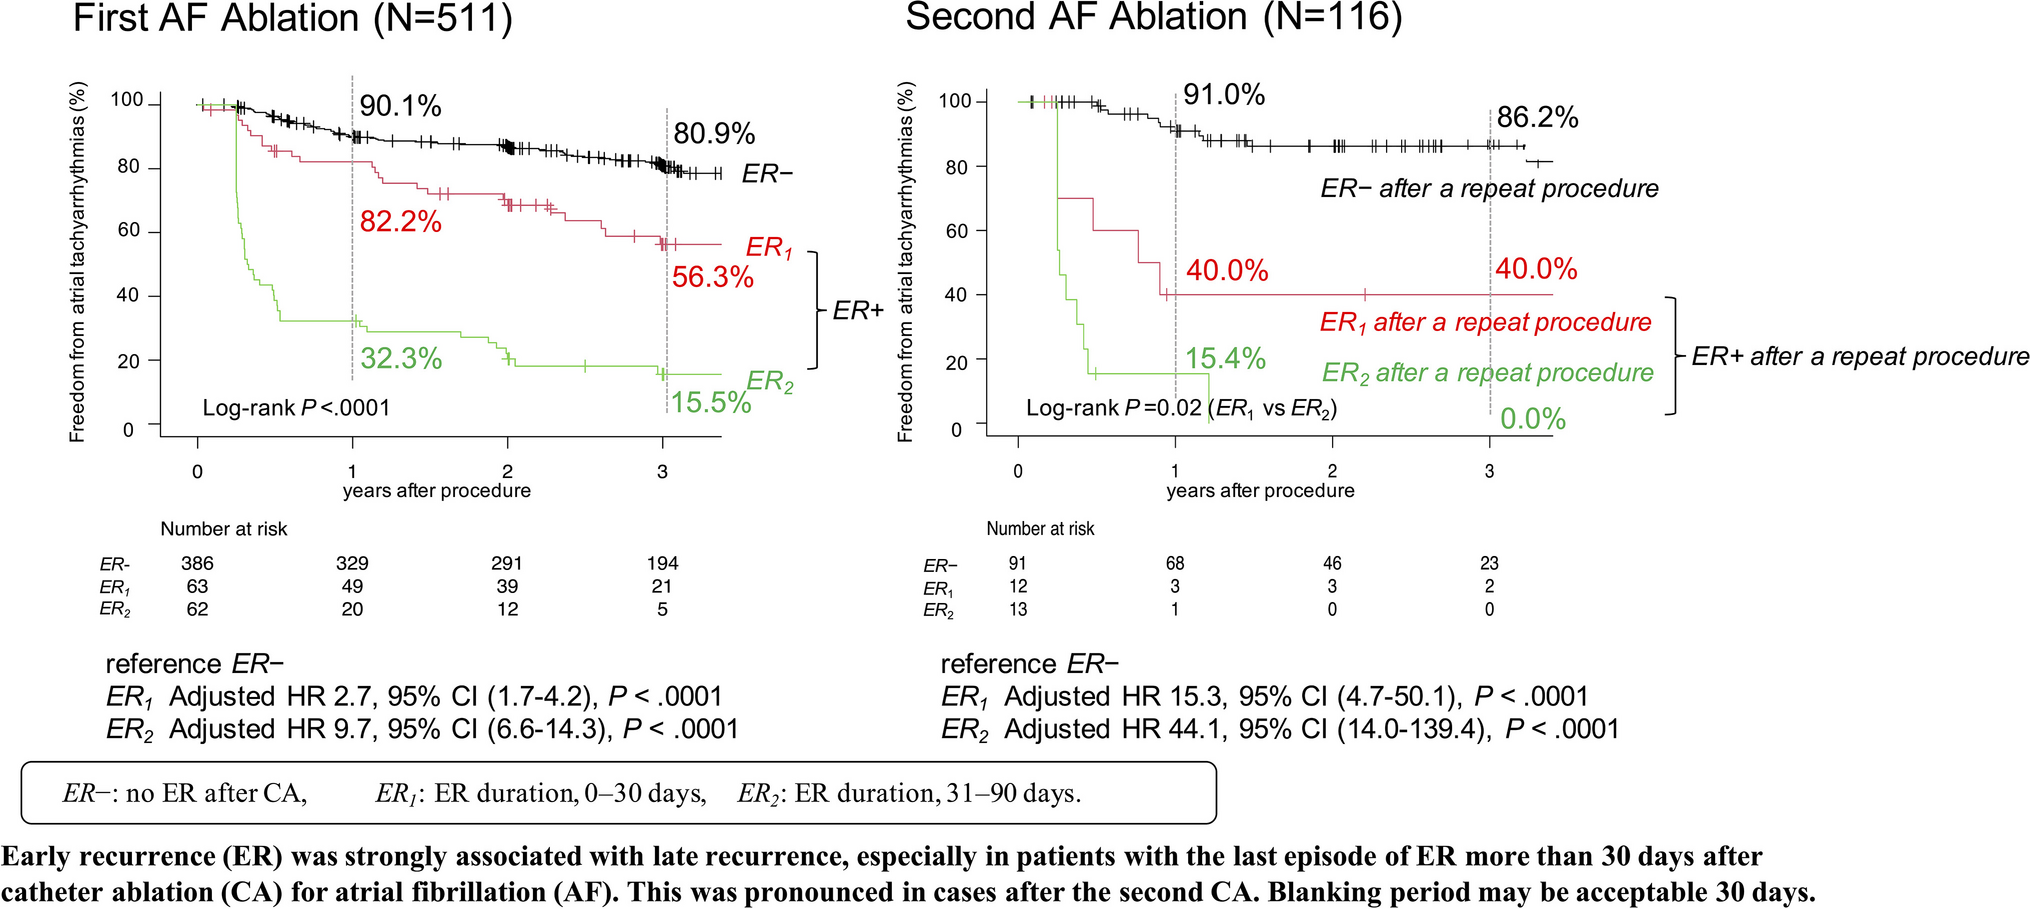 Rethinking appropriate blanking period after atrial fibrillation ablation